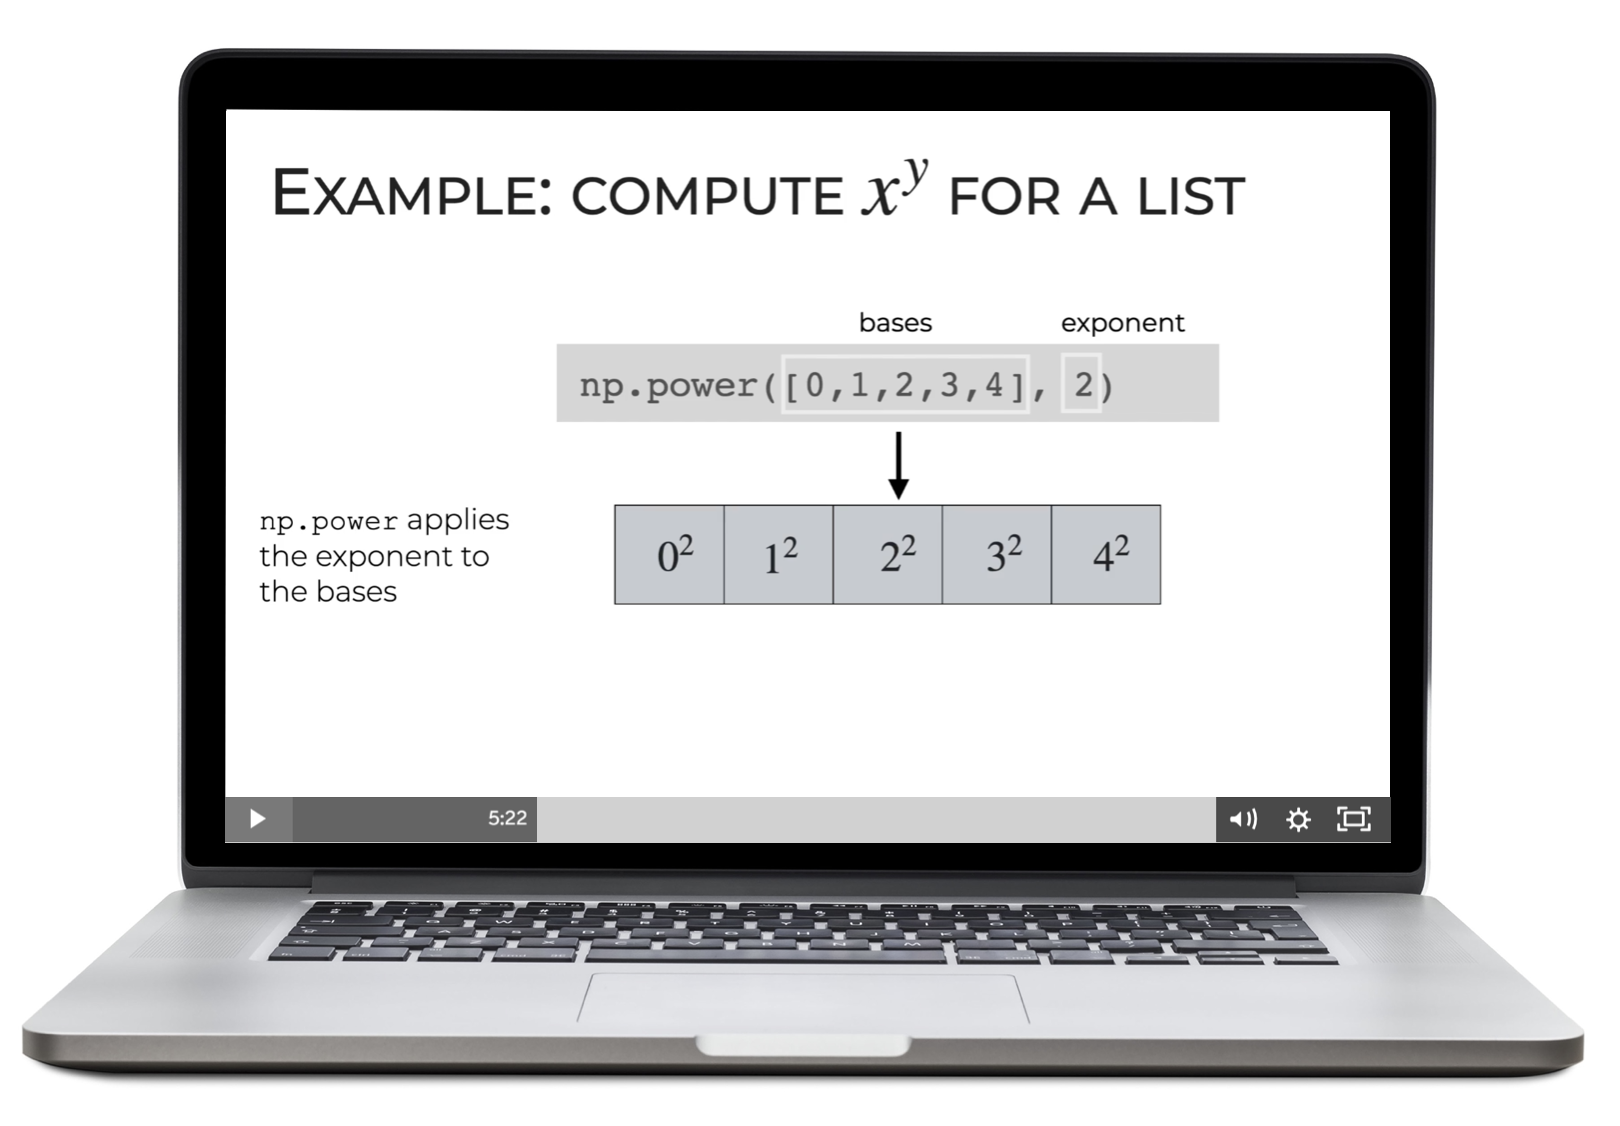 An image of a laptop showing how to use the Numpy Power function.